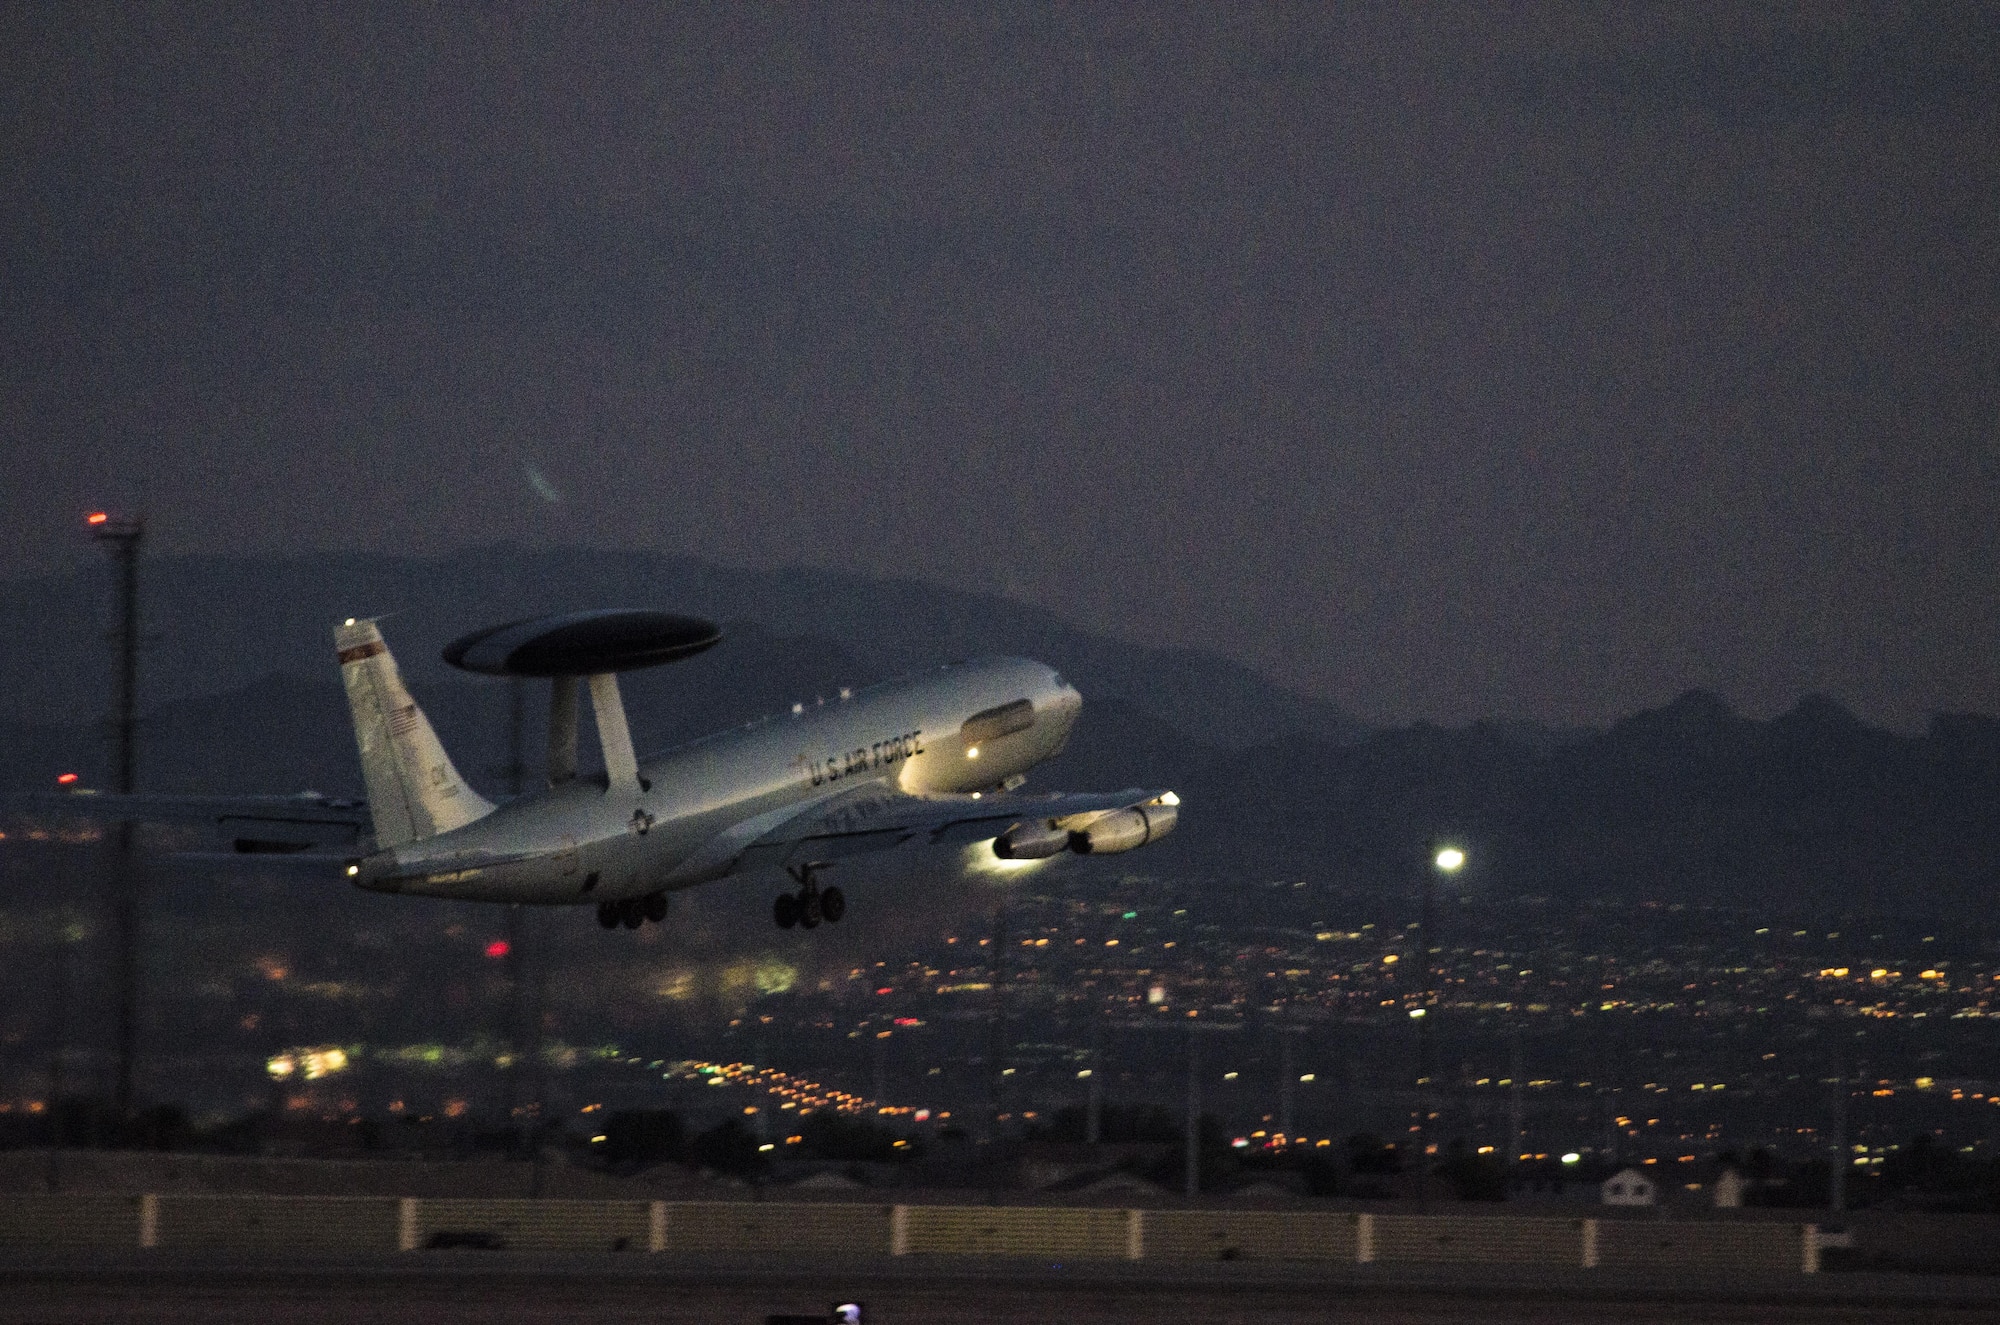 An E-3 Sentry assigned to the 965th Airborne Air Control Squadron, Tinker Air Force Base, Okla., takes off while conducting a night sortie during exercise Red Flag 16-4 at Nellis AFB, Nev., Aug. 17, 2016. The 965th AACS played a key role during the exercise by providing command and control to allied forces. (U. S. Air Force photo by Tech. Sgt. Frank Miller)